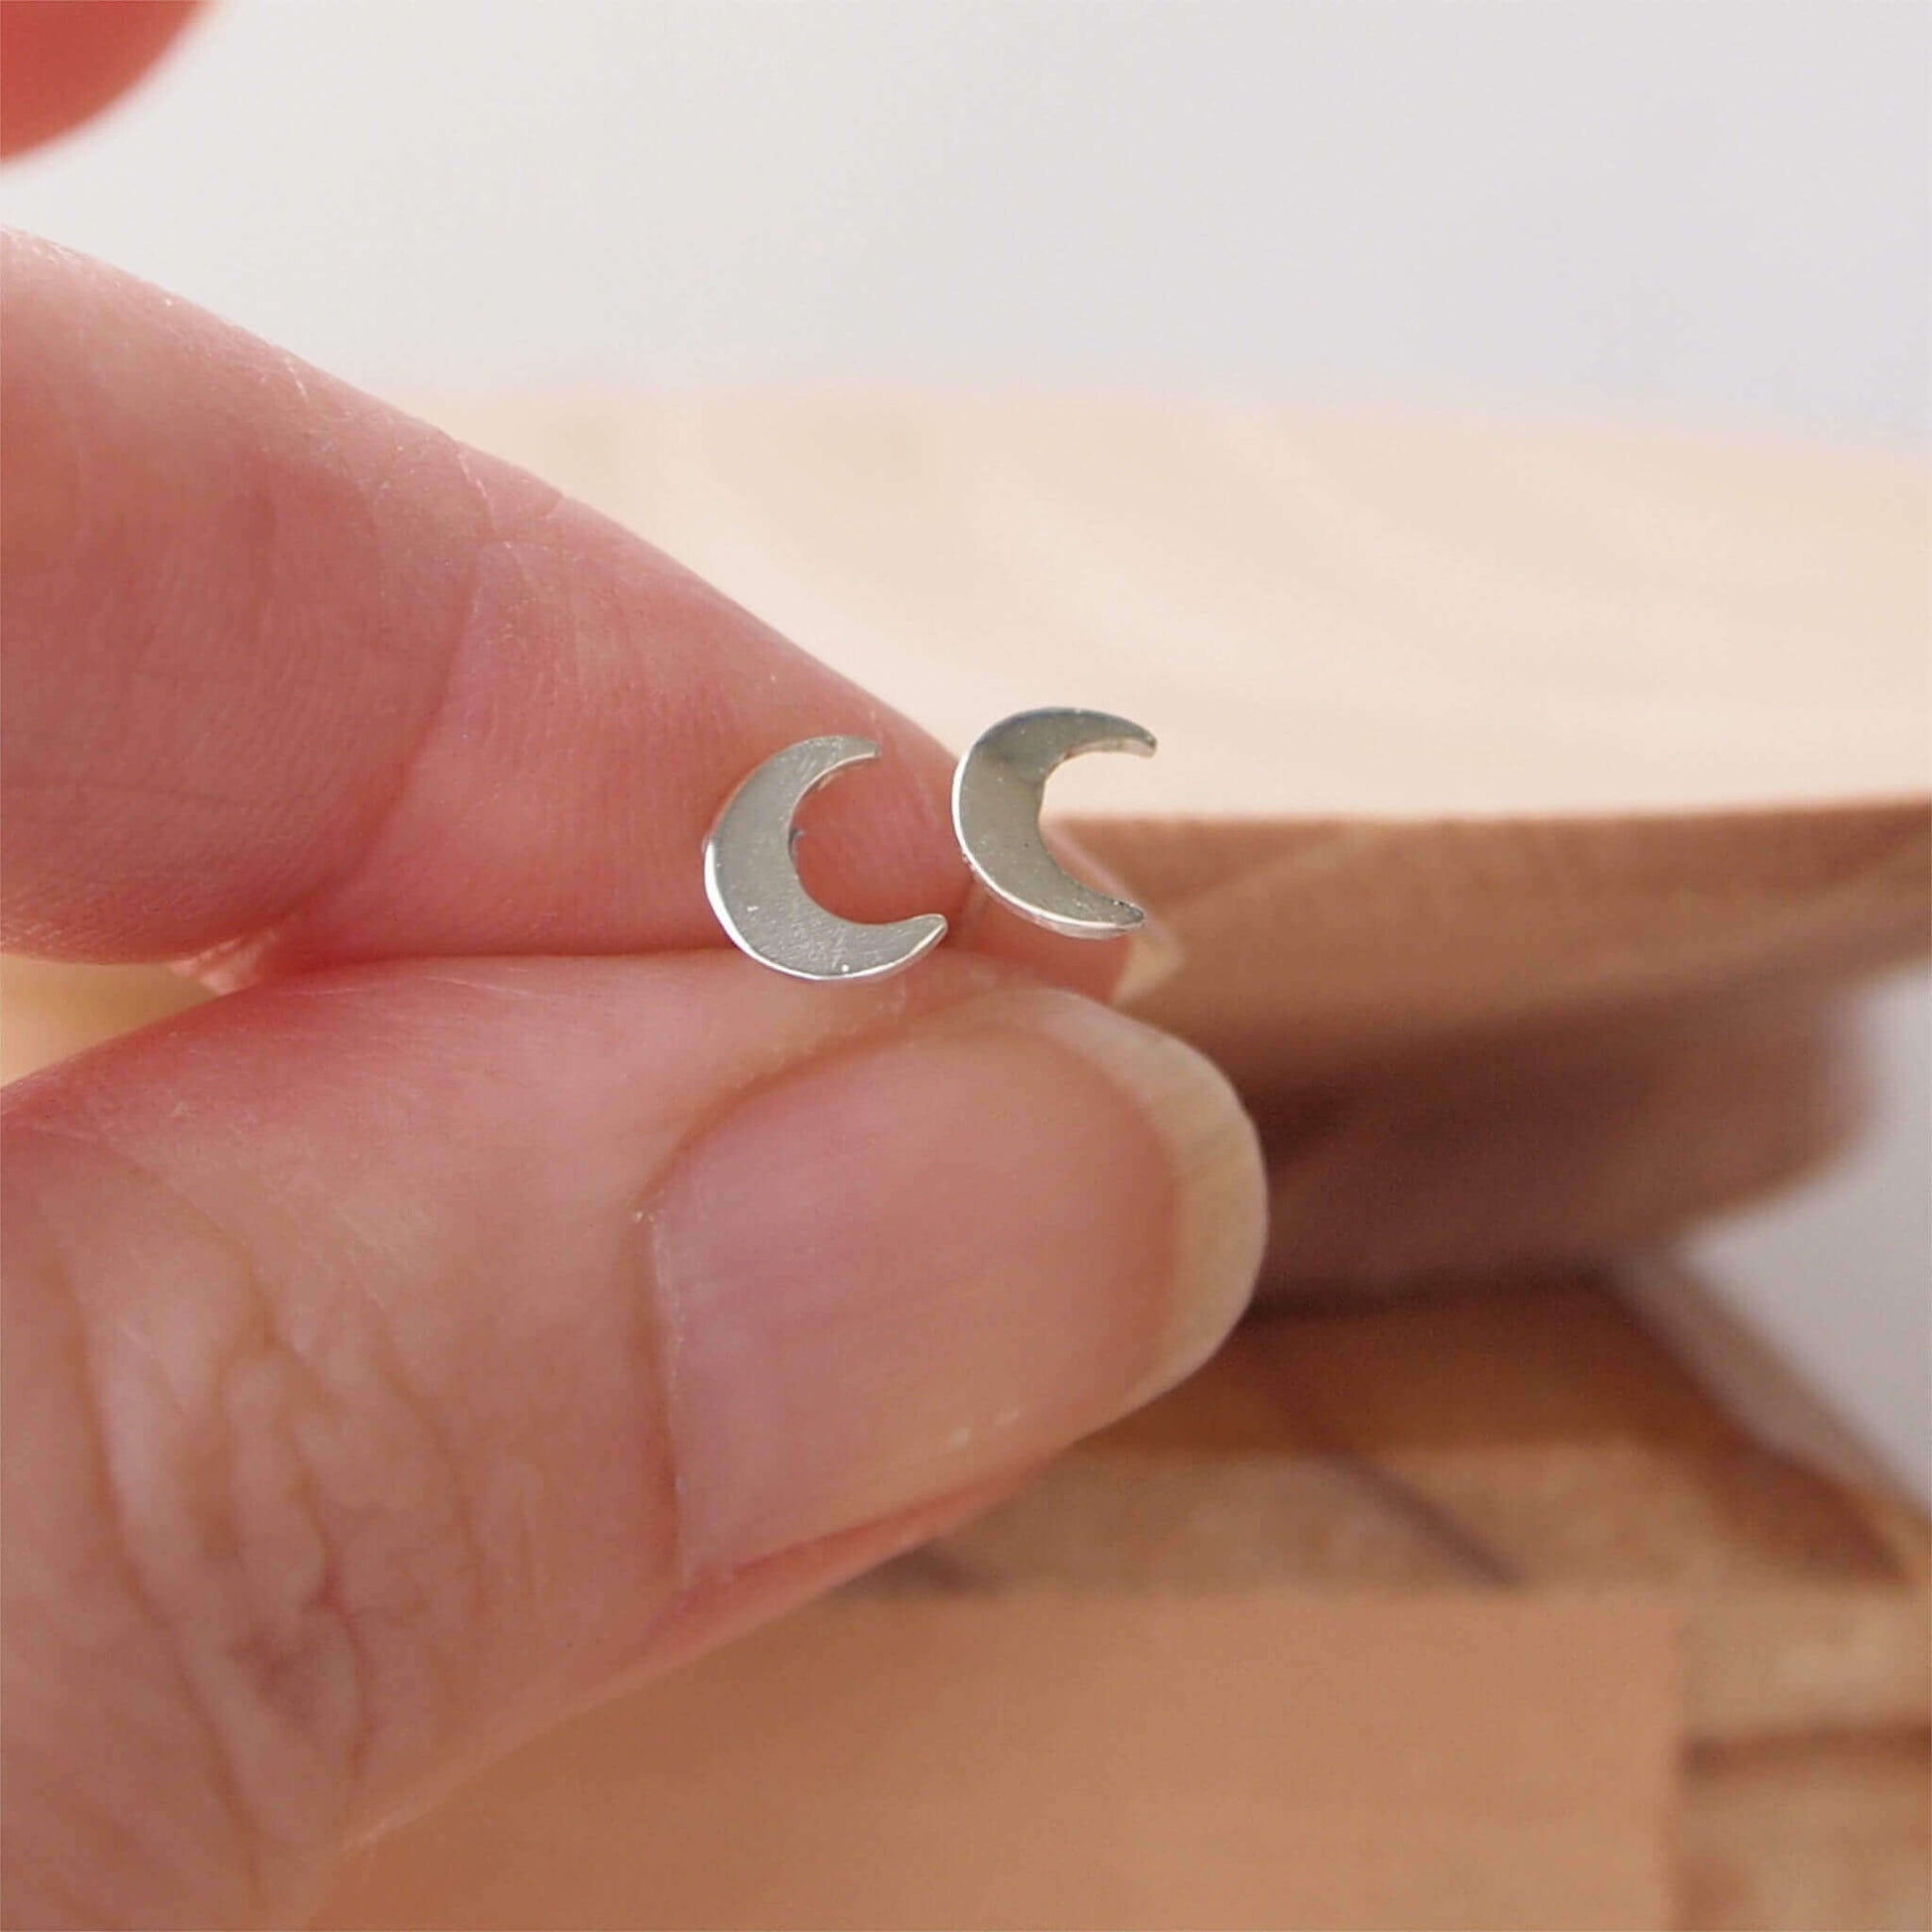 Silver Moon Studs in Sterling Silver measuring a small 11mm in size. Suitable for most ear piercings where a normal stud can be worn and looks great in ears with multiple piercings. Handmade by maram jewellery in Scotland UK